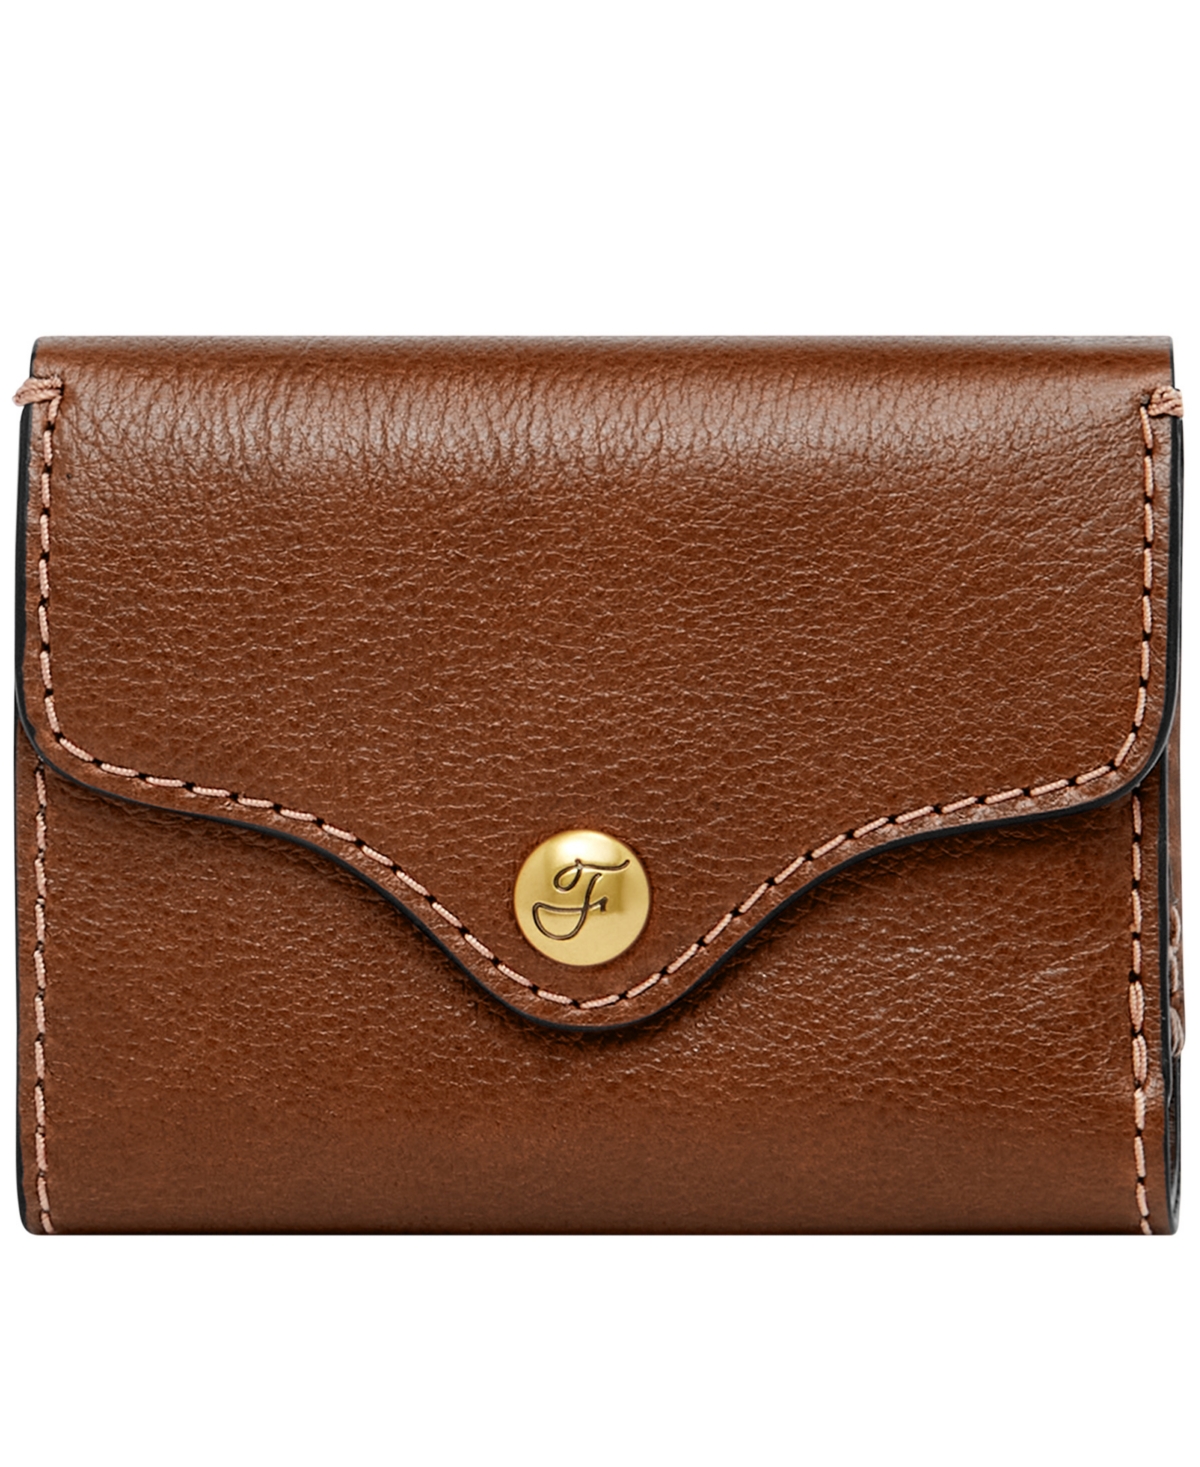 FOSSIL HERITAGE LEATHER TRIFOLD WALLET